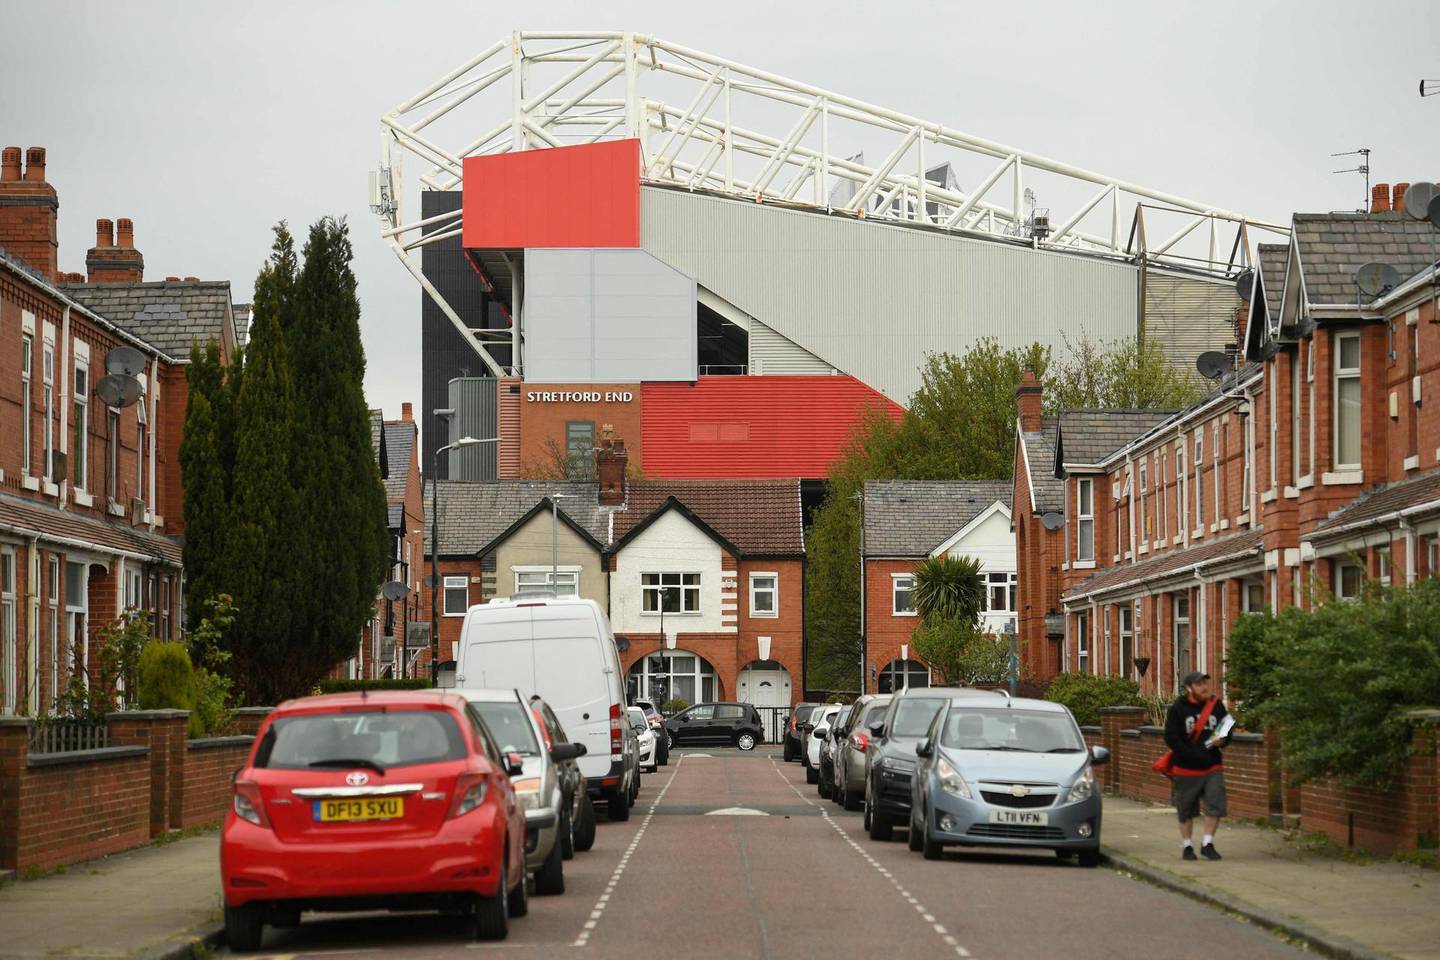 Manchester United's Old Trafford stadium rises above the nearby residential streets in Manchester, northwest England on April 21, 2021.  The proposed European Super League (ESL) appeared dead in the water today after all six English clubs withdrew following a furious backlash from fans and threats from football authorities. / AFP / Oli SCARFF
